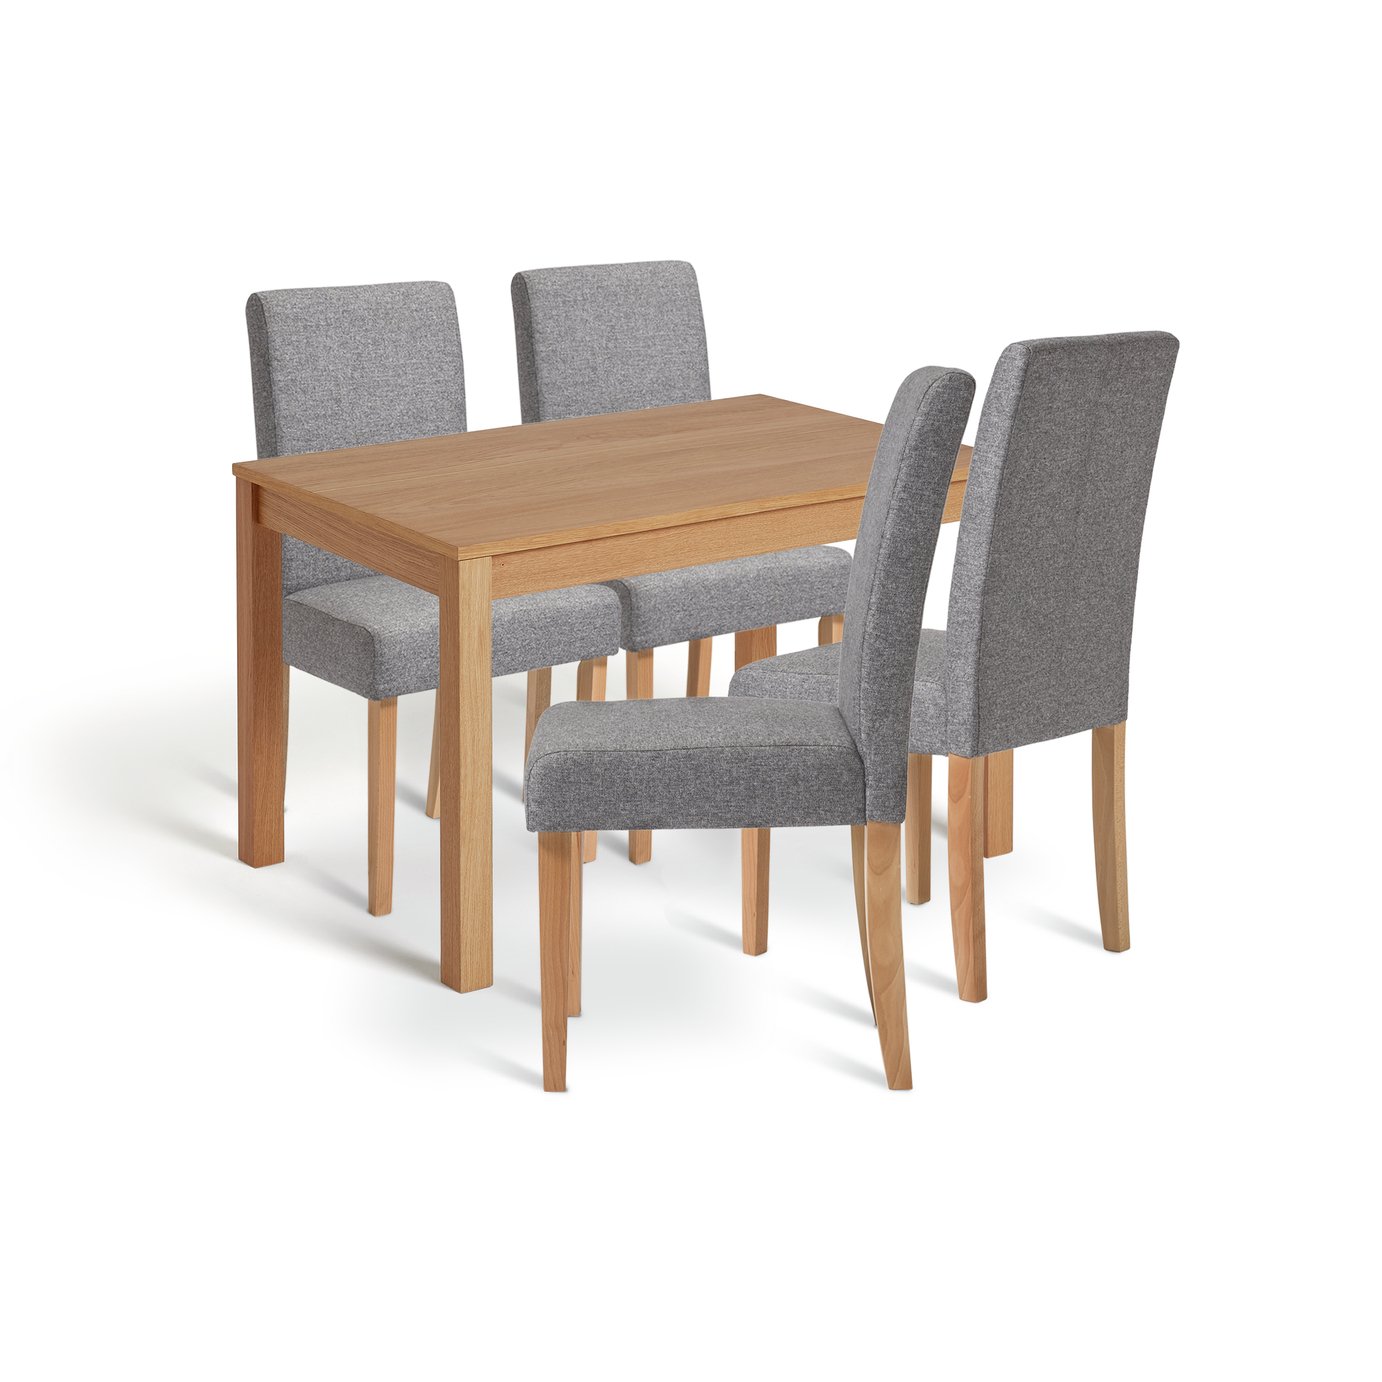 Habitat Clifton Wood Dining Table & 4 Grey Chairs